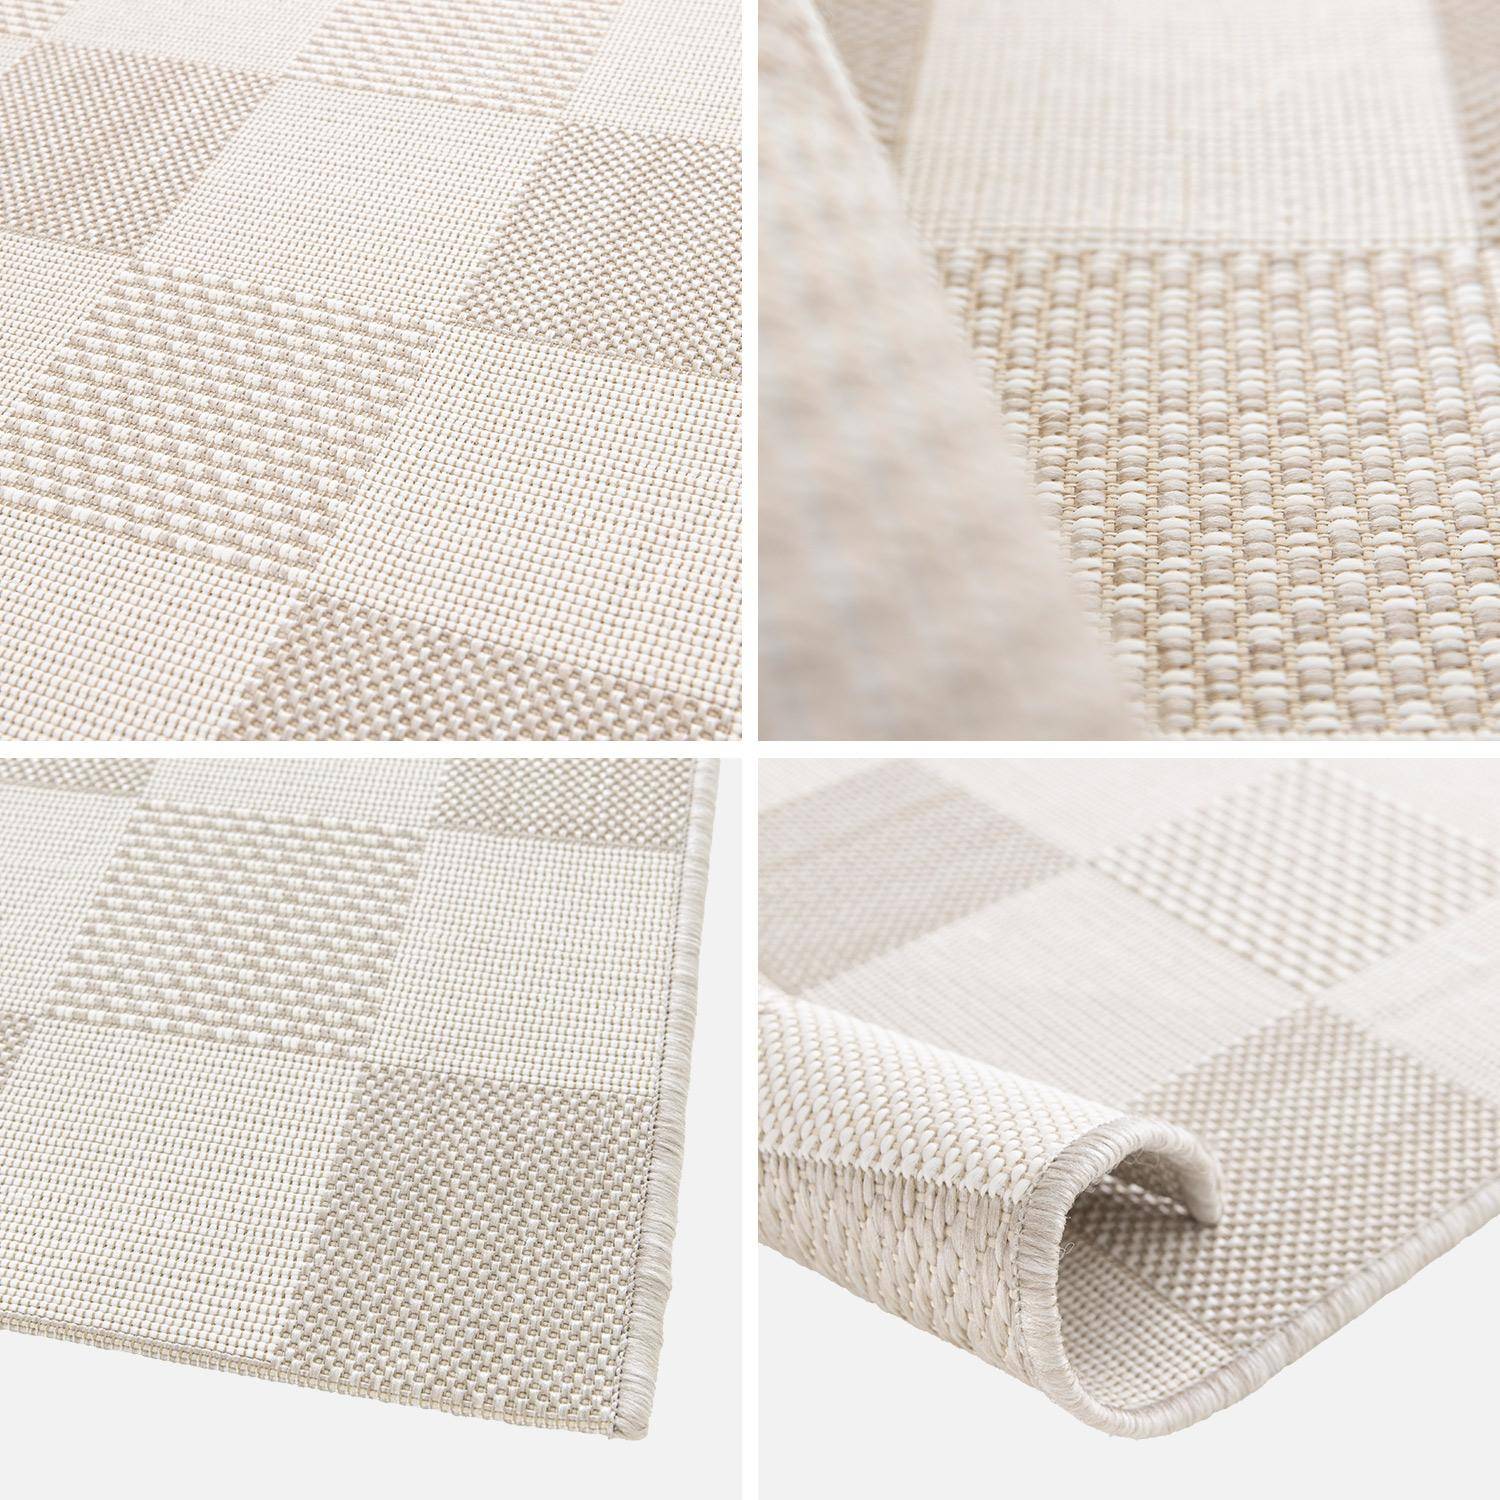 Indoor/outdoor carpet with beige chequered pattern, recycled polyester, Damian, 120 x 170 cm,sweeek,Photo3